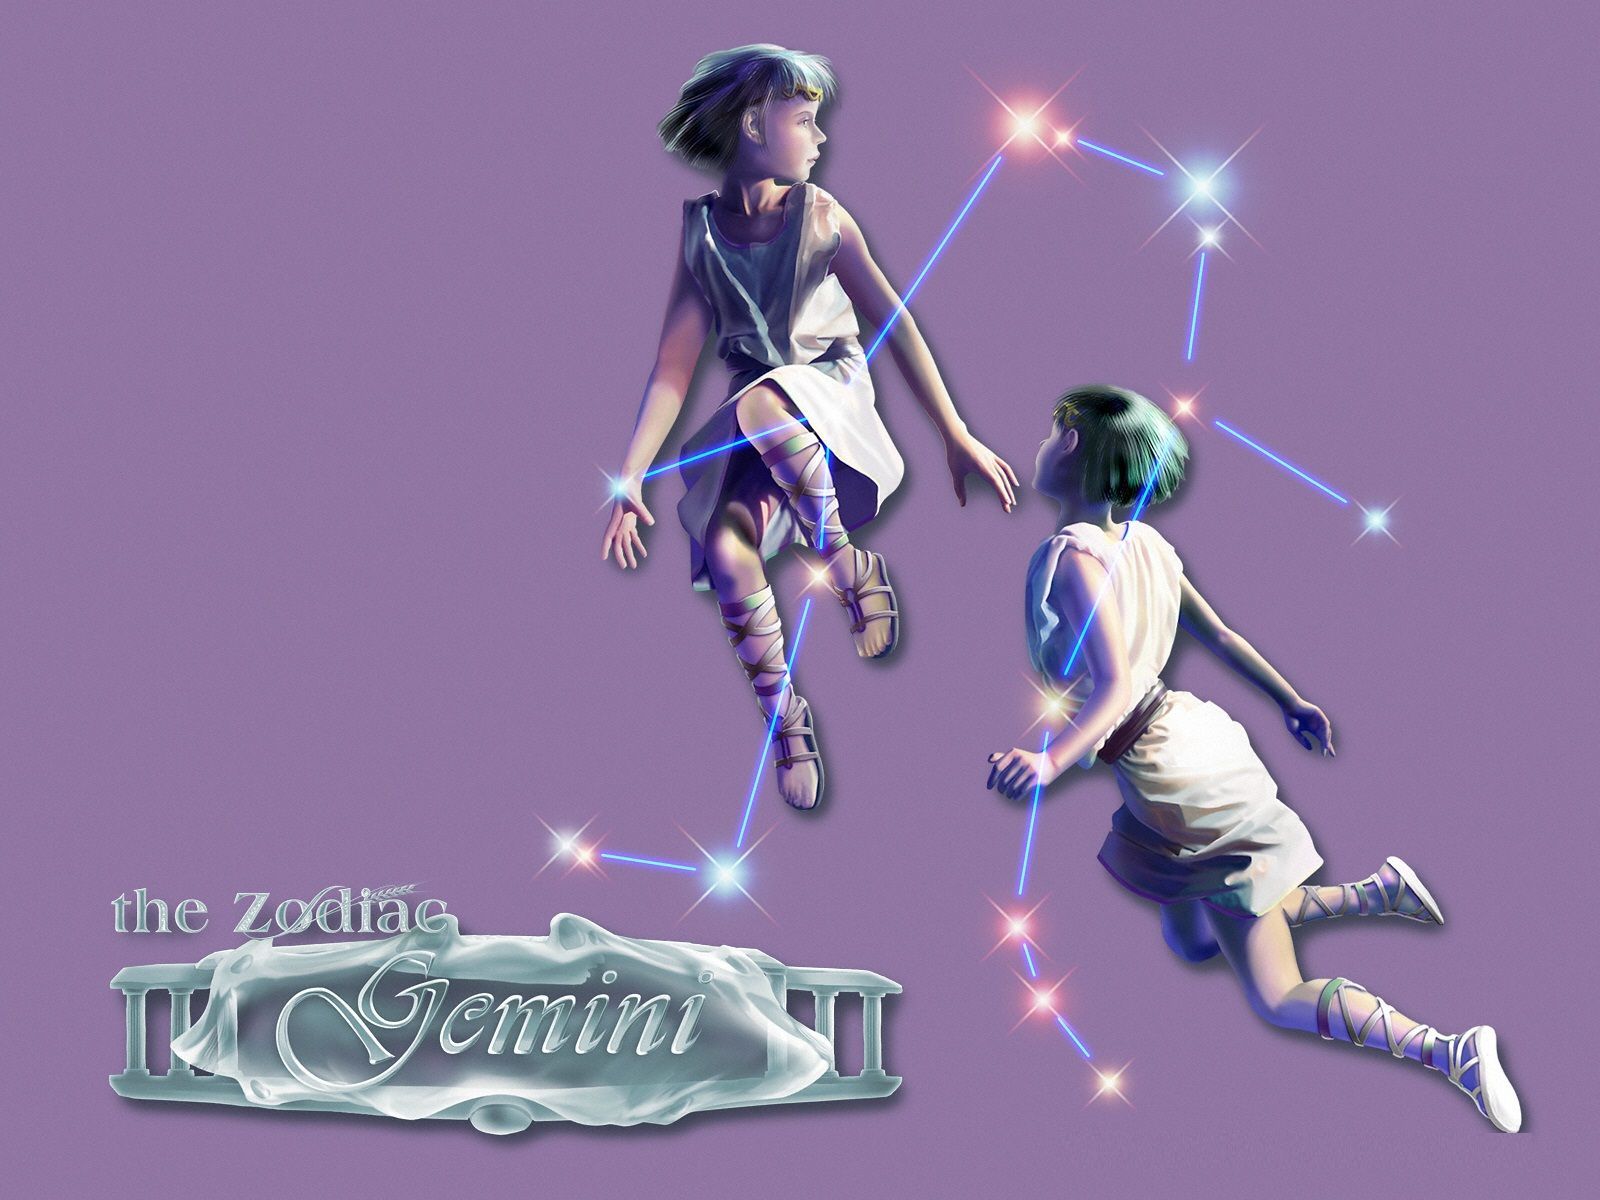 A girl with blue hair is jumping with her arms outstretched, in front of a purple background with the zodiac sign of Gemini. - Gemini